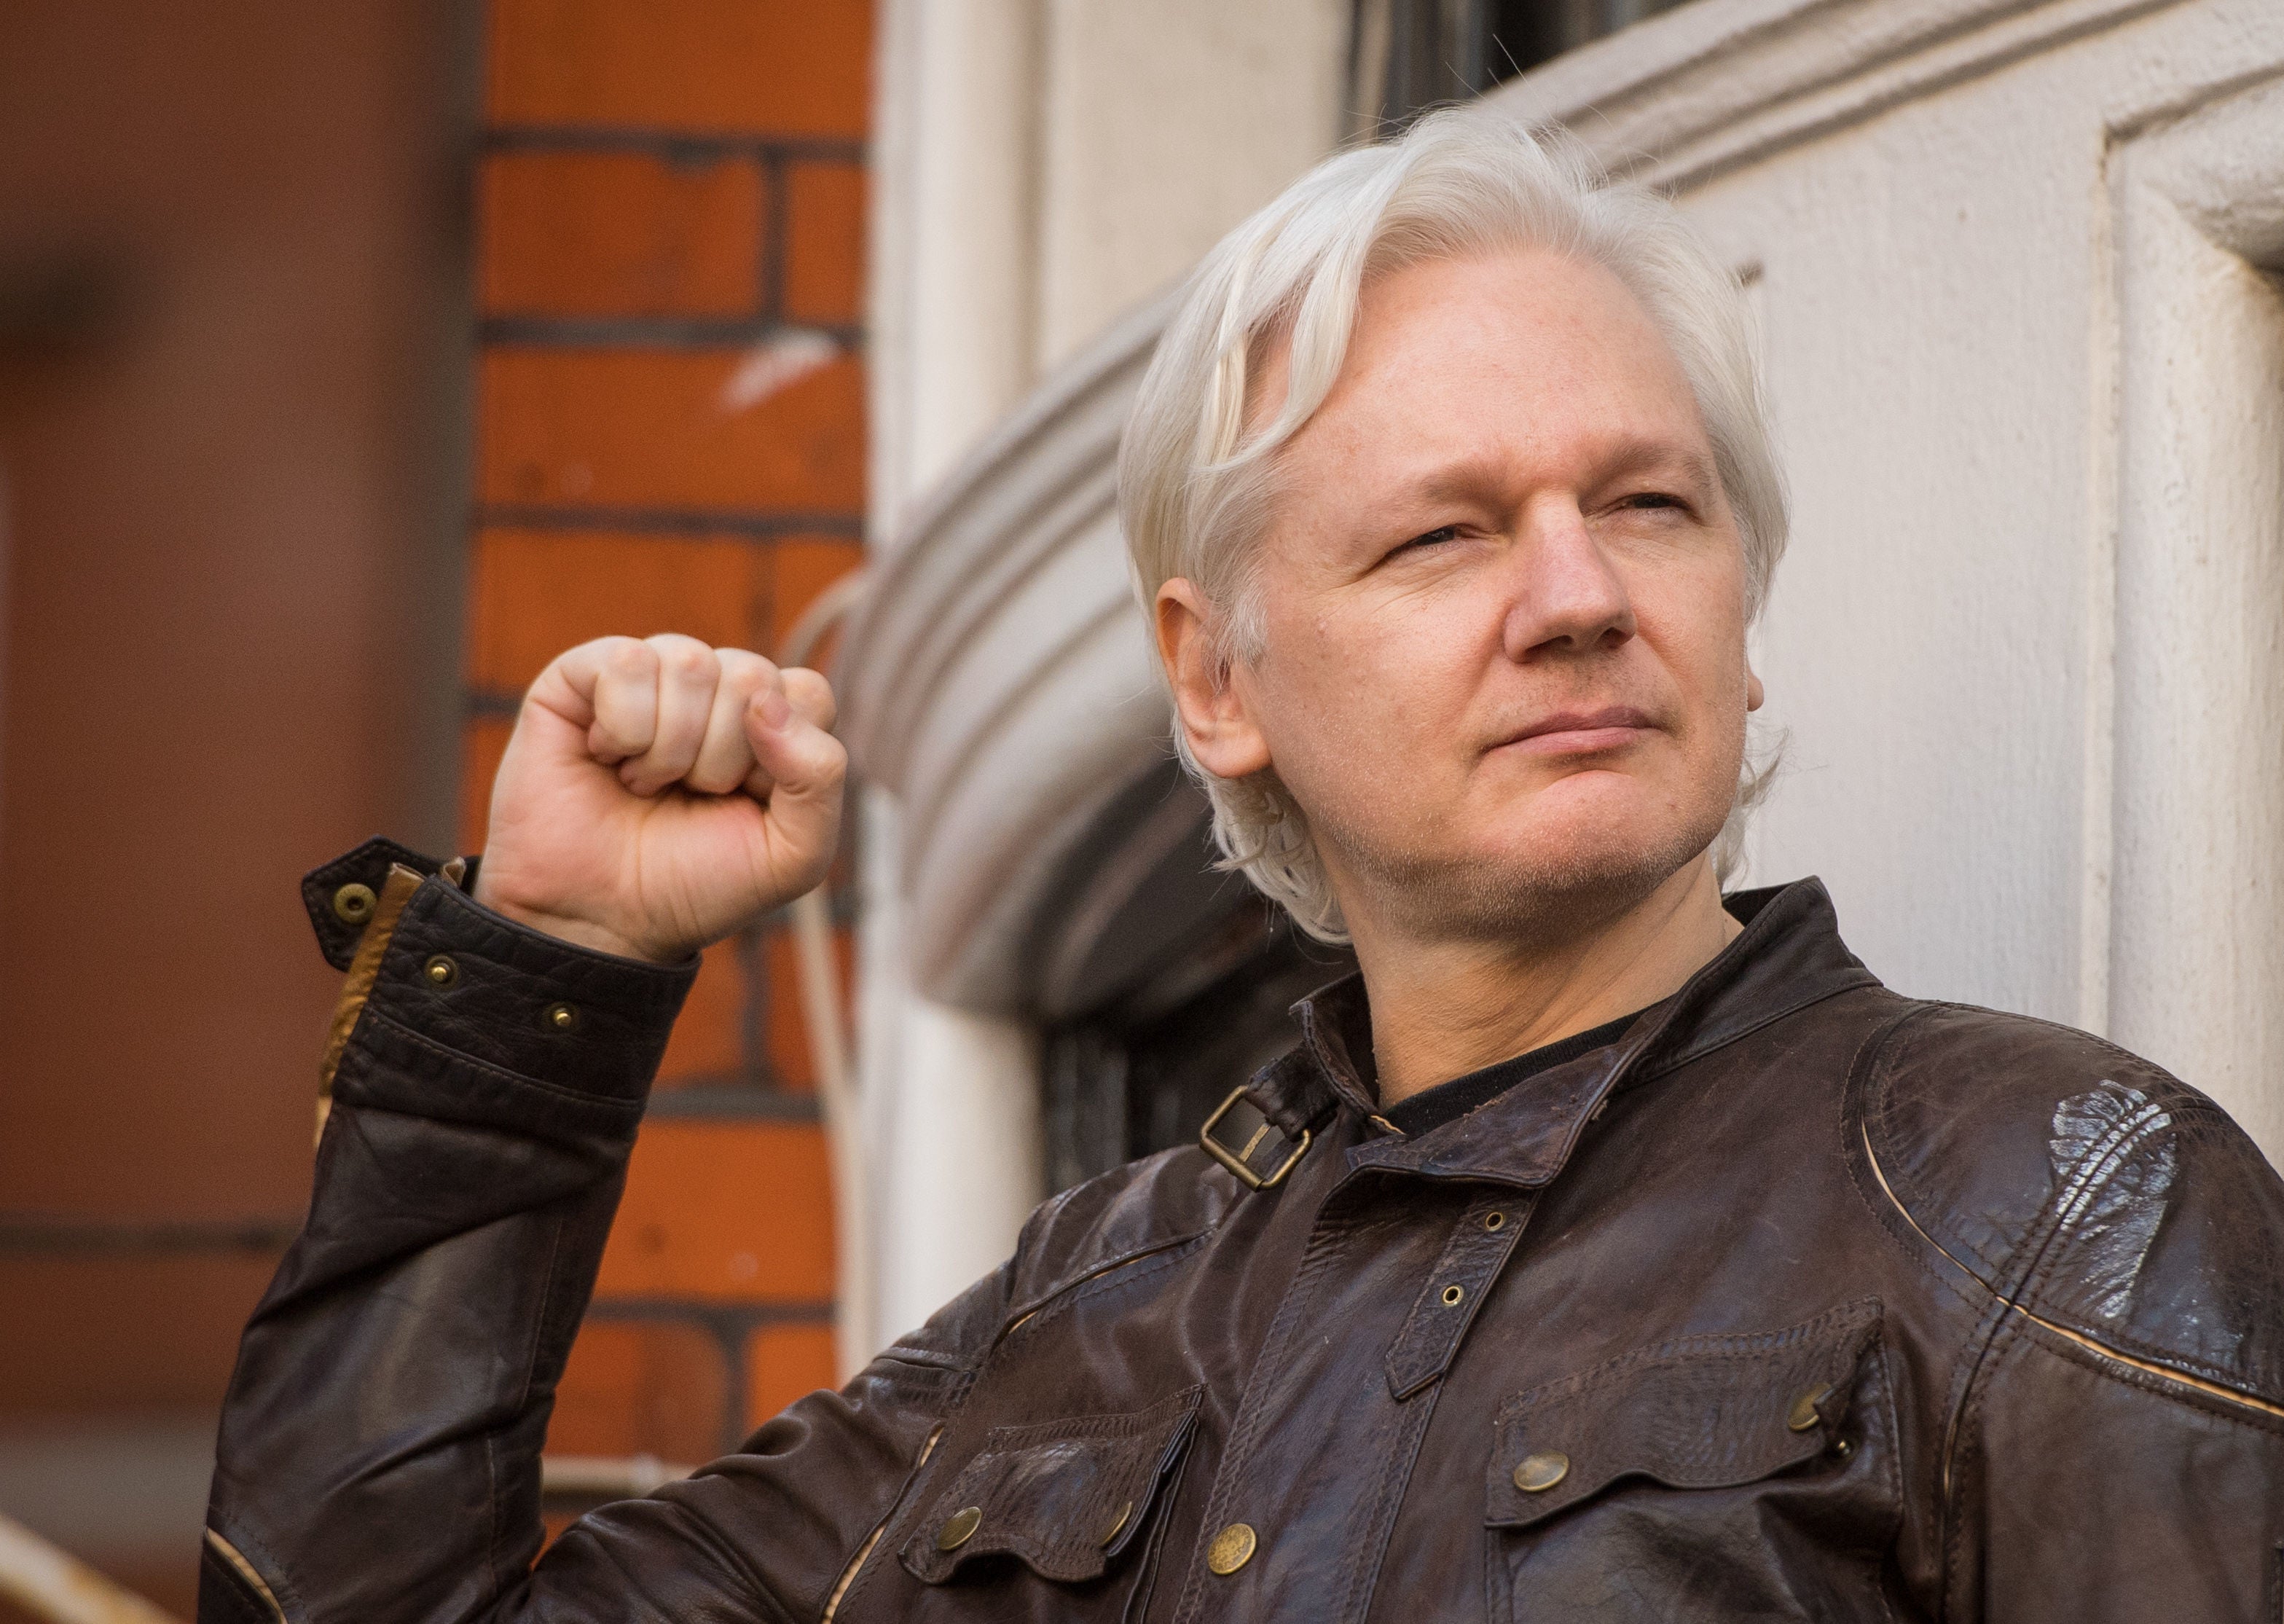 Assange, 51, has been held in London’s high security Belmarsh Prison for almost five years while US authorities seek to extradite him to face trial on espionage charges